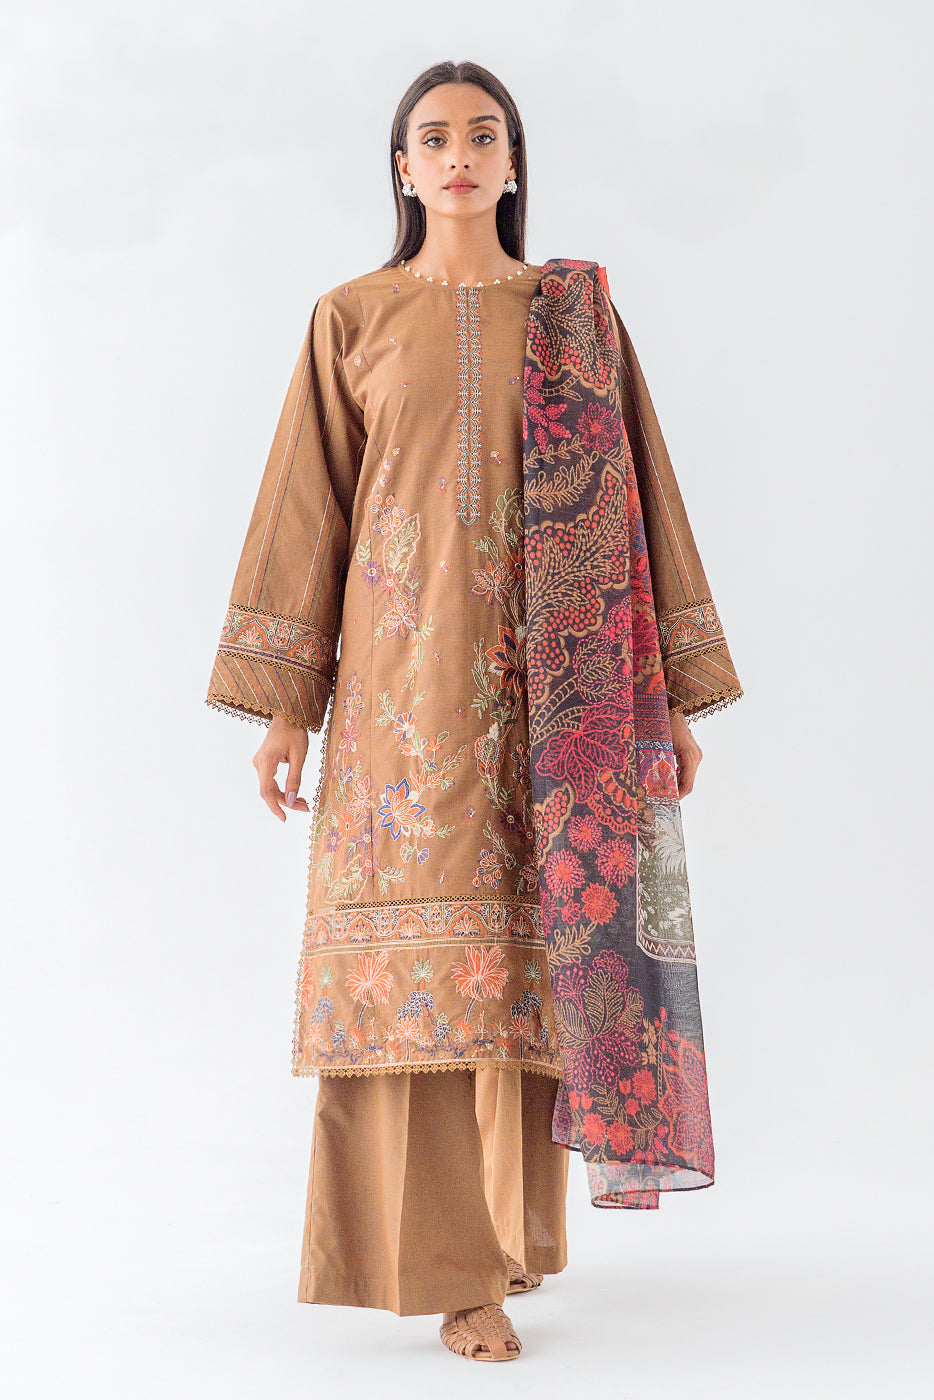 3 PIECE - EMBROIDERED TWO TONE SUIT - DELISH MOCHA (UNSTITCHED)